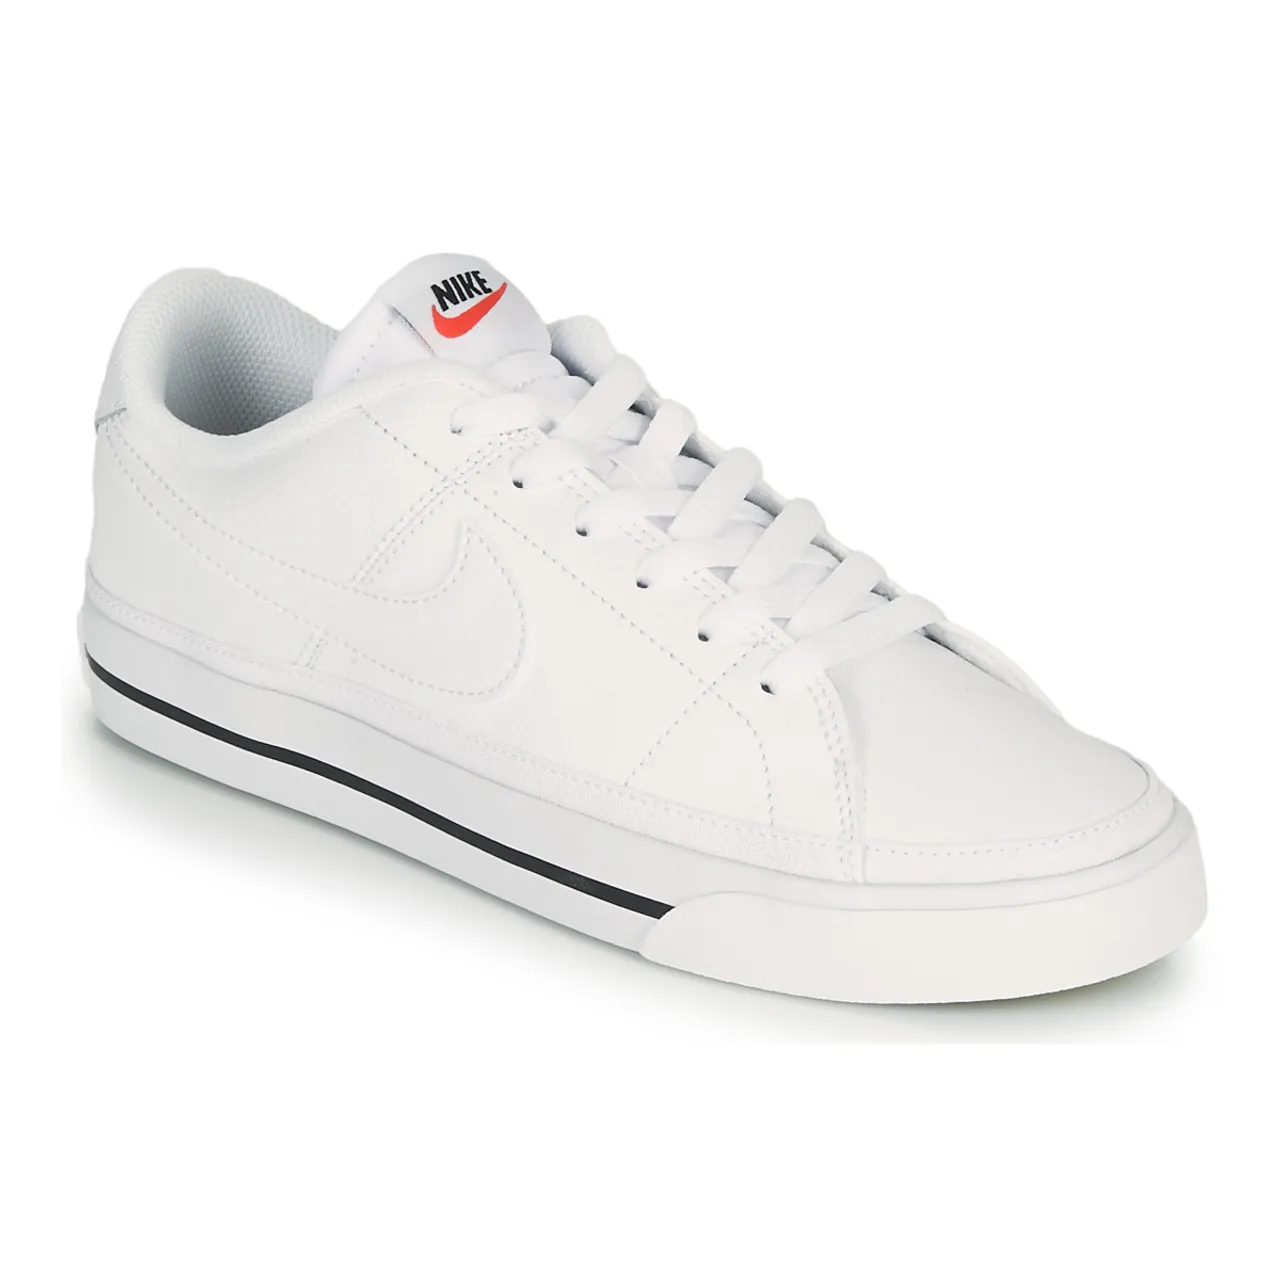 Lage Sneakers Nike COURT LEGACY